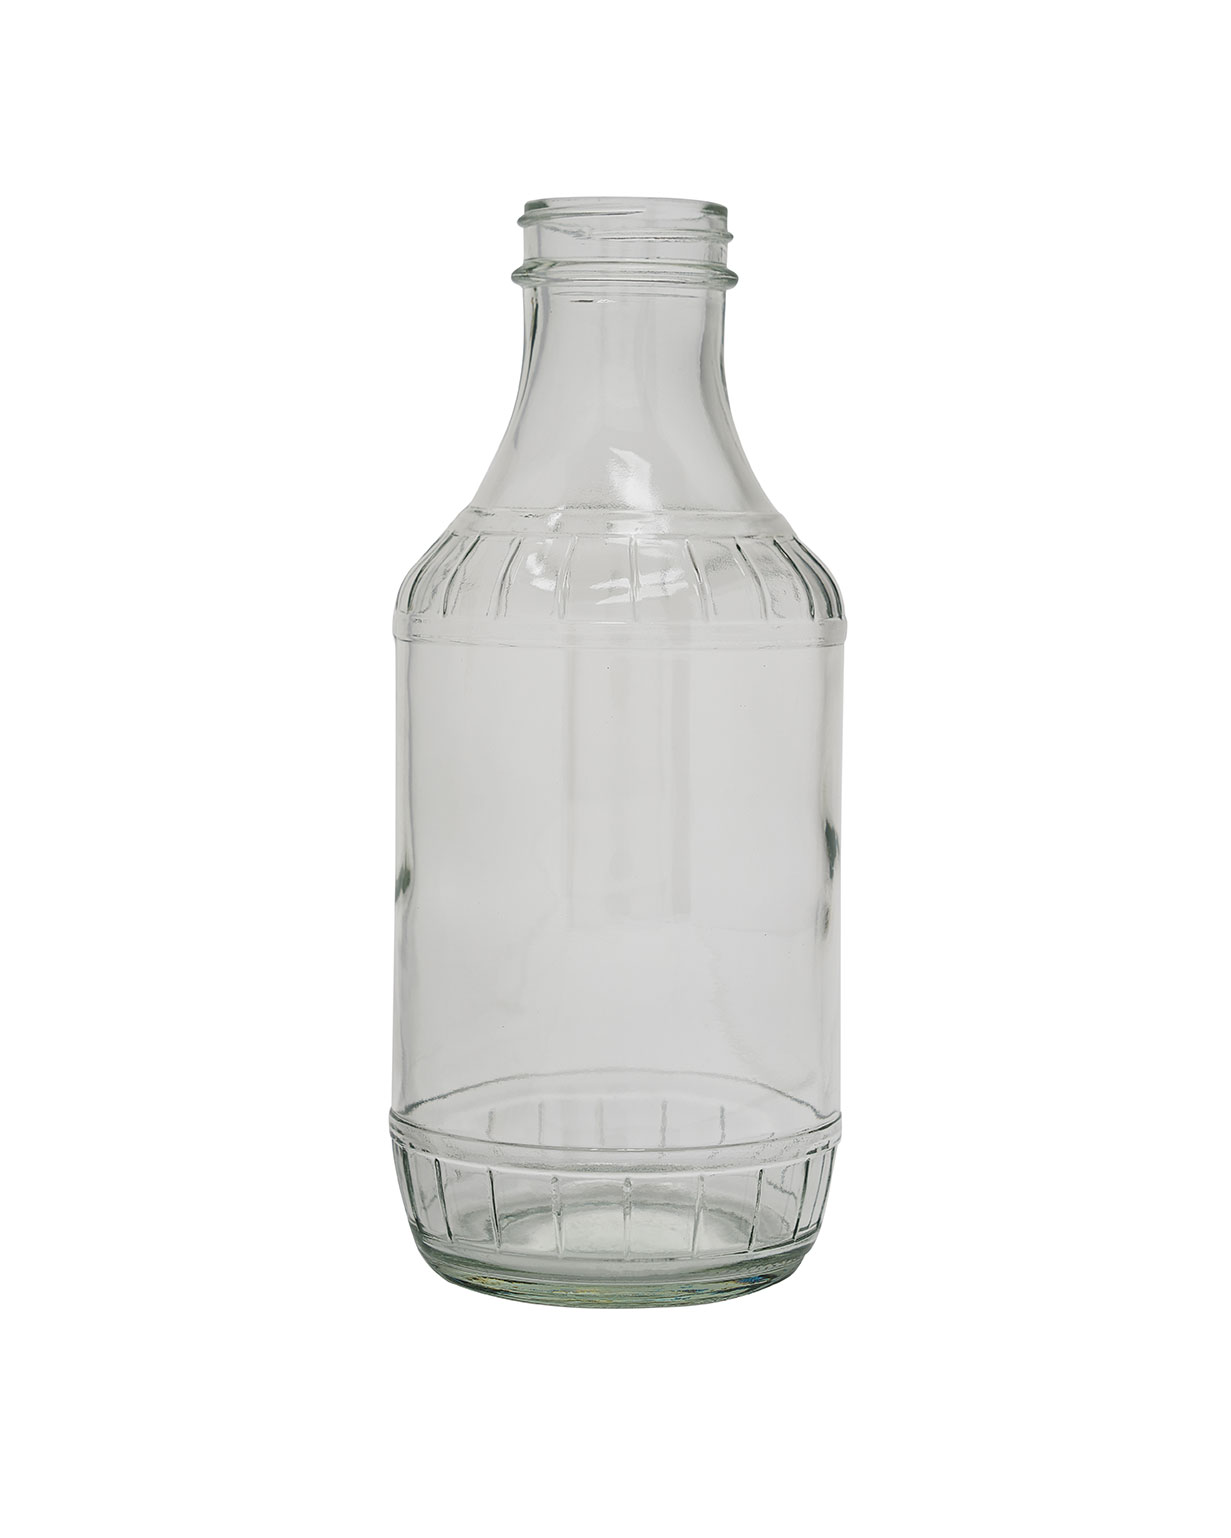 16 oz glass clear decanter 38-400